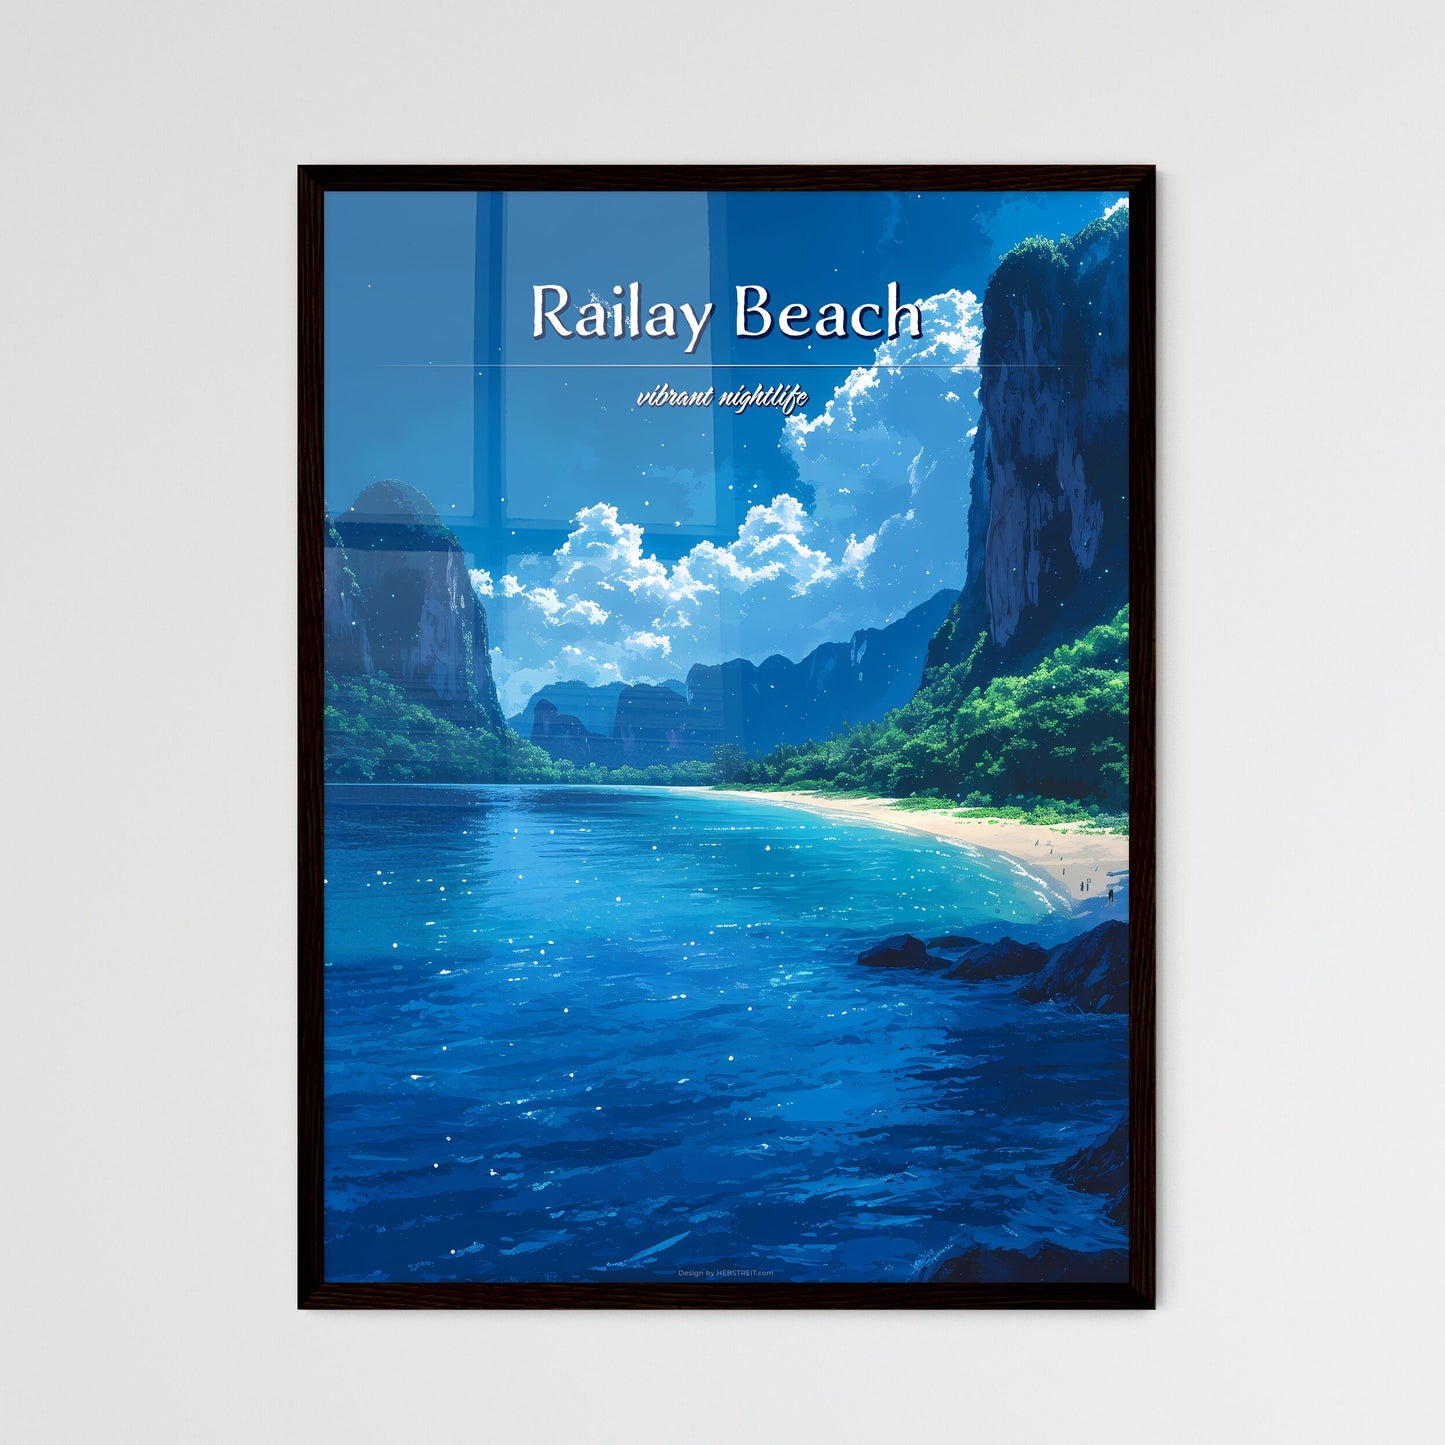 Railay Beach - Art print of a beach with trees and mountains Default Title